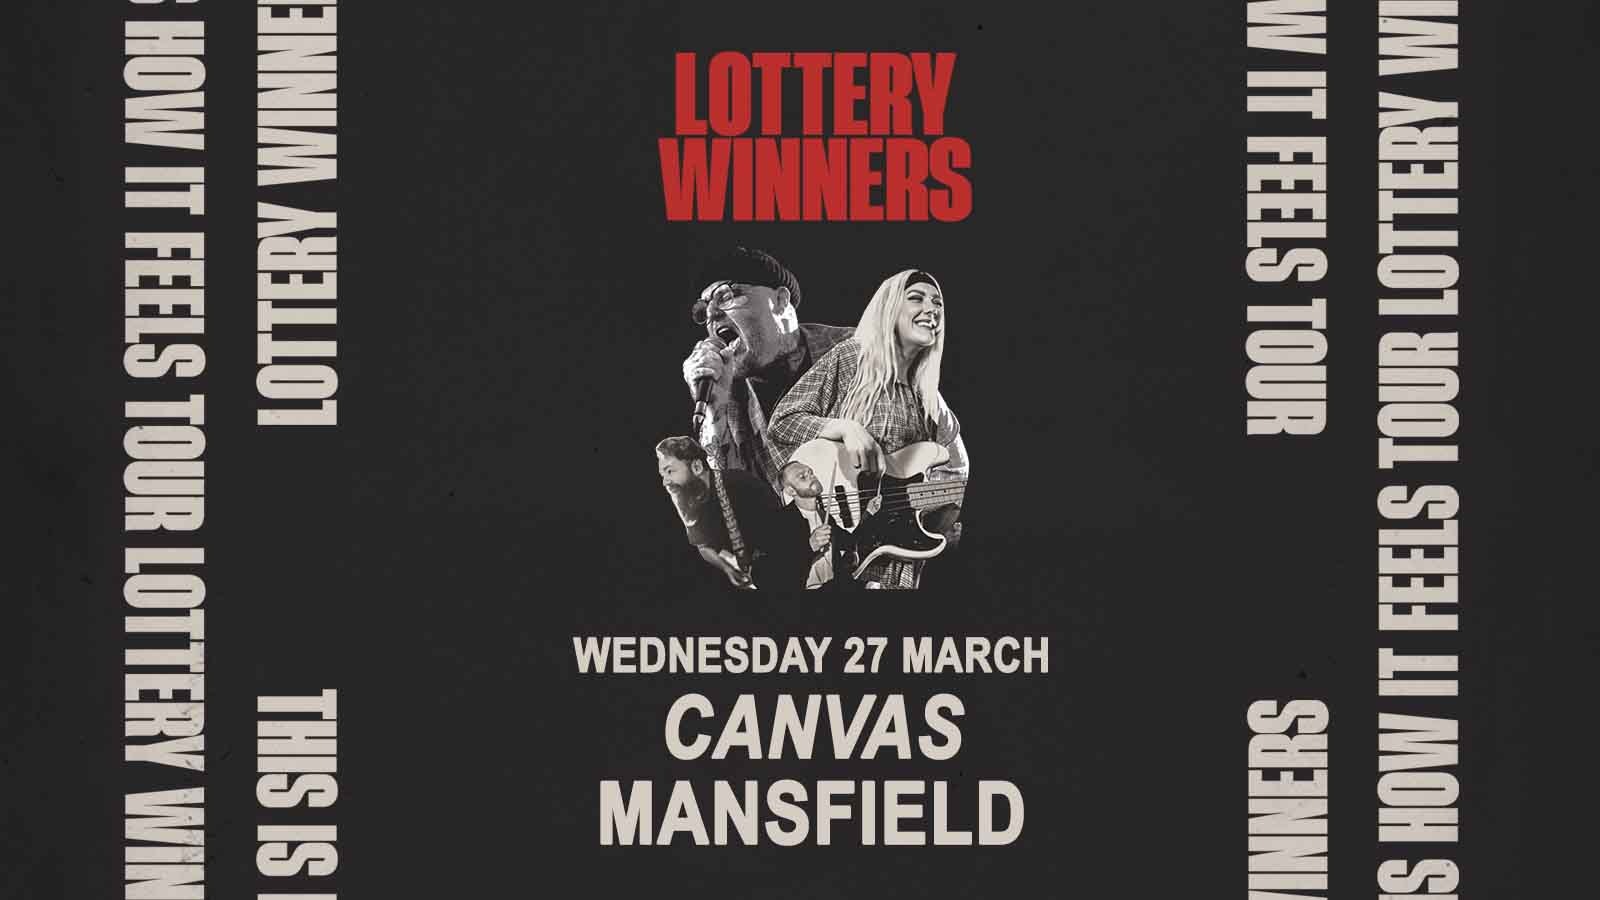 Lottery Winners at Canvas, Mansfield